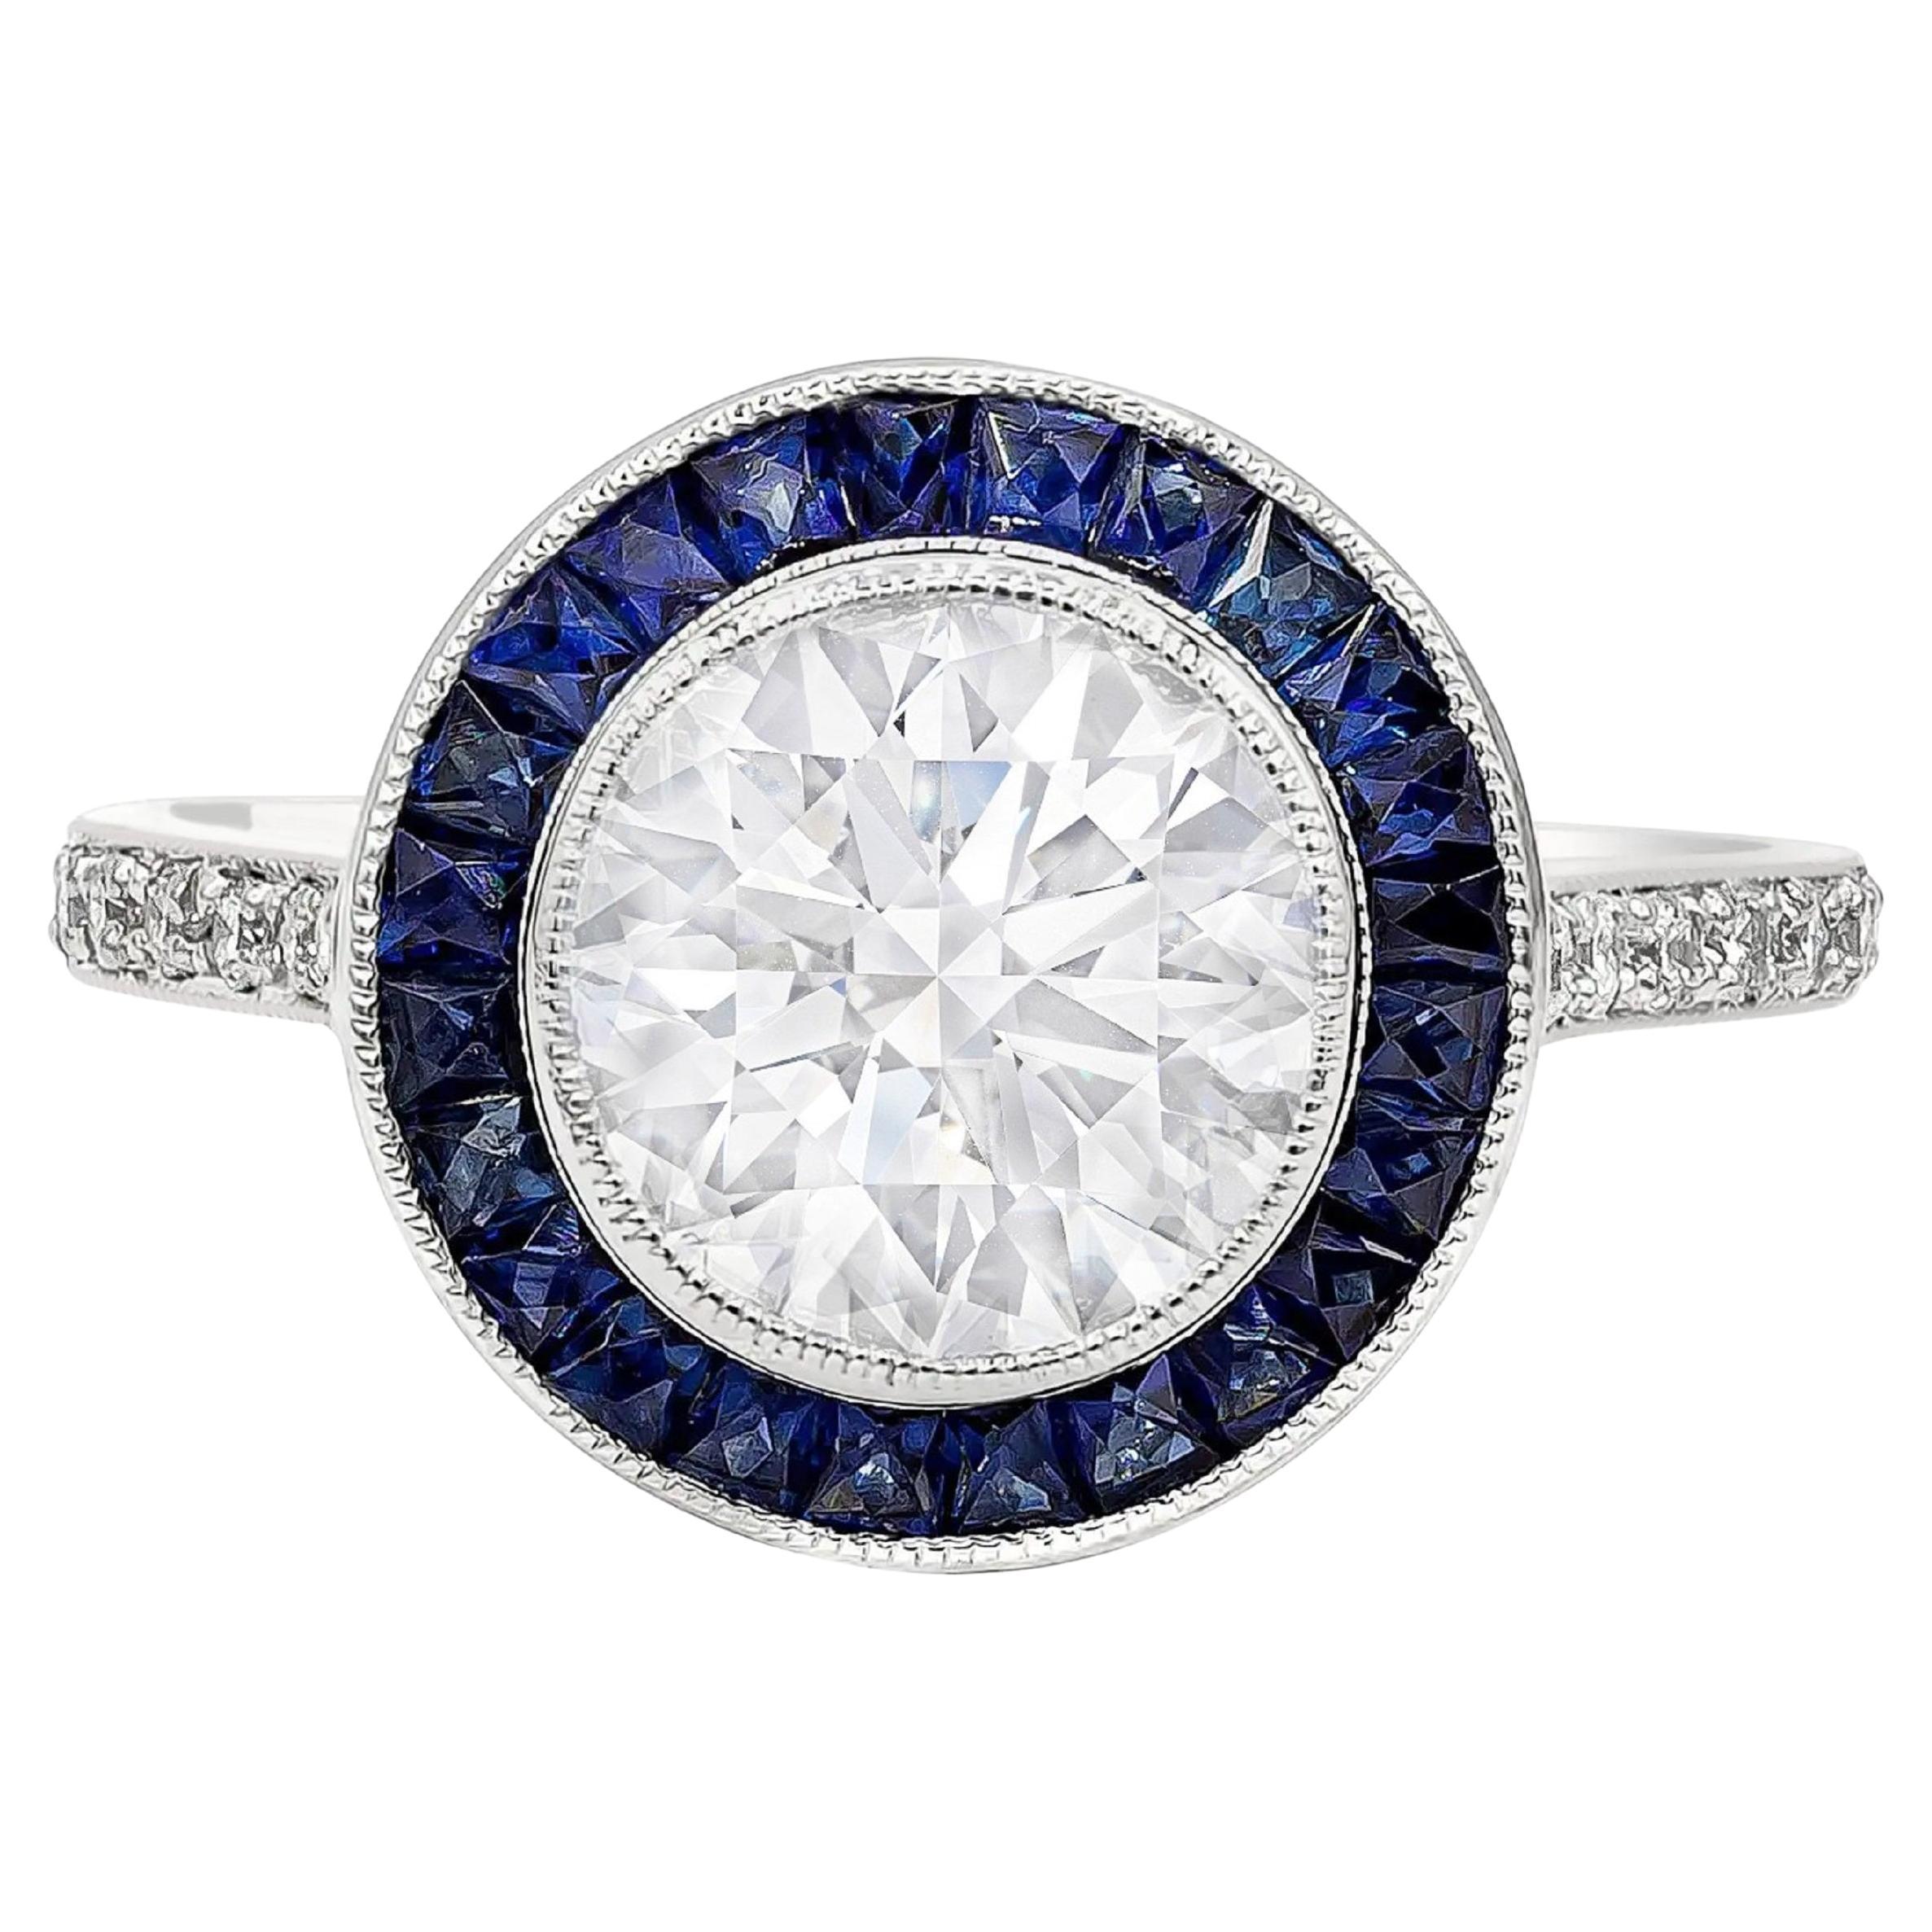 Tiffany & Co. Royal Blue Sapphire Calibre Diamond Solitaire Engagement Ring For Sale